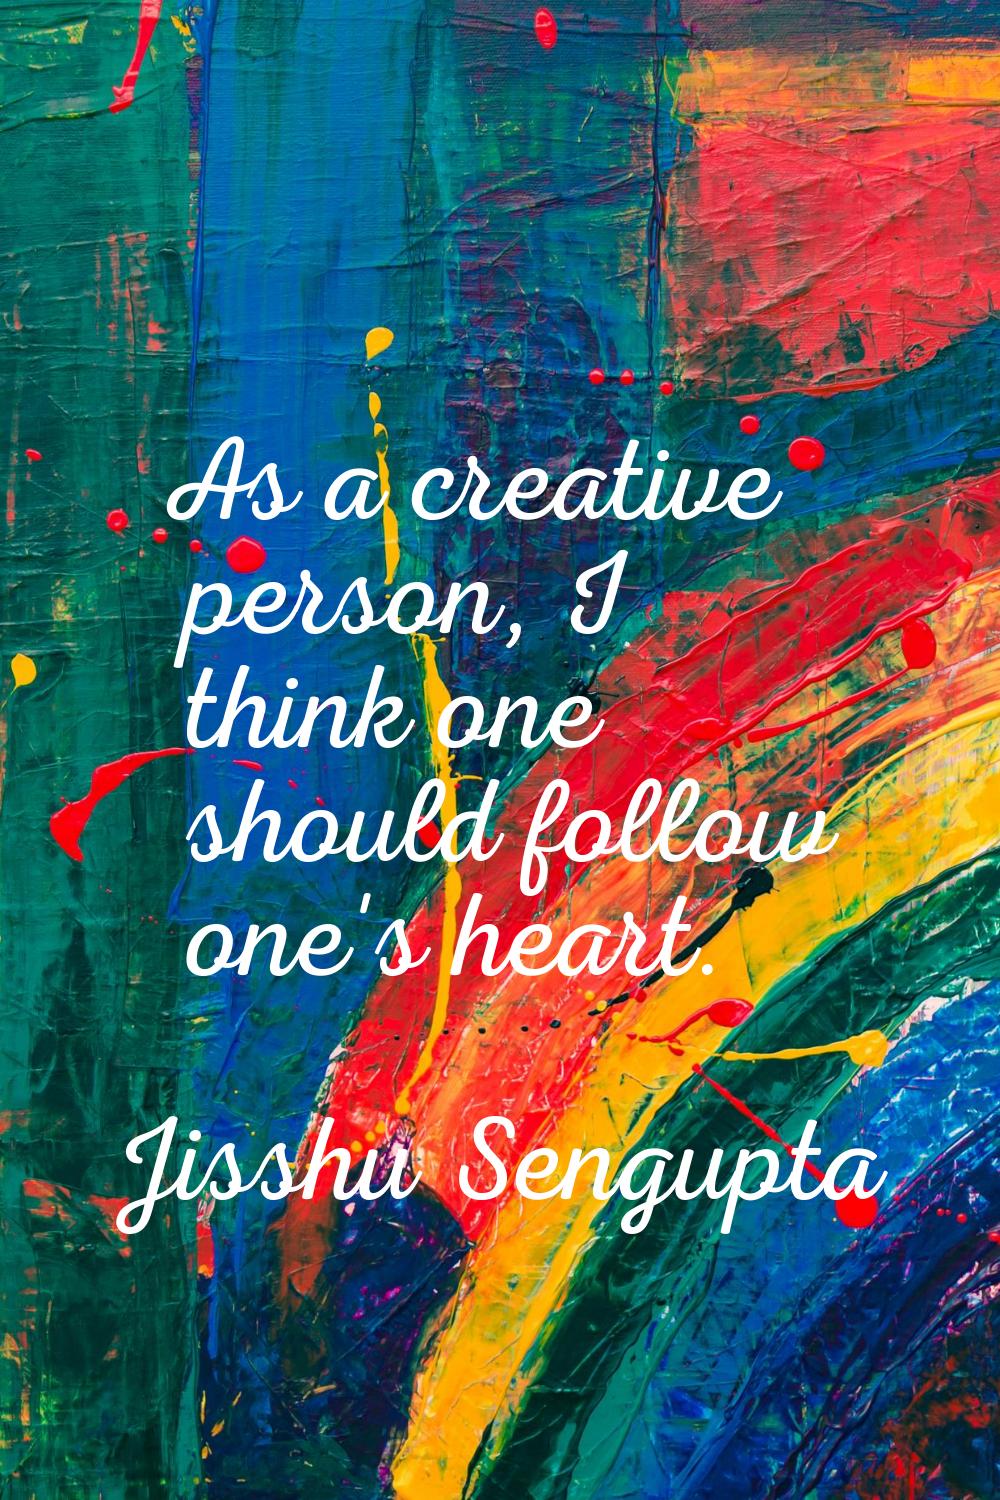 As a creative person, I think one should follow one's heart.